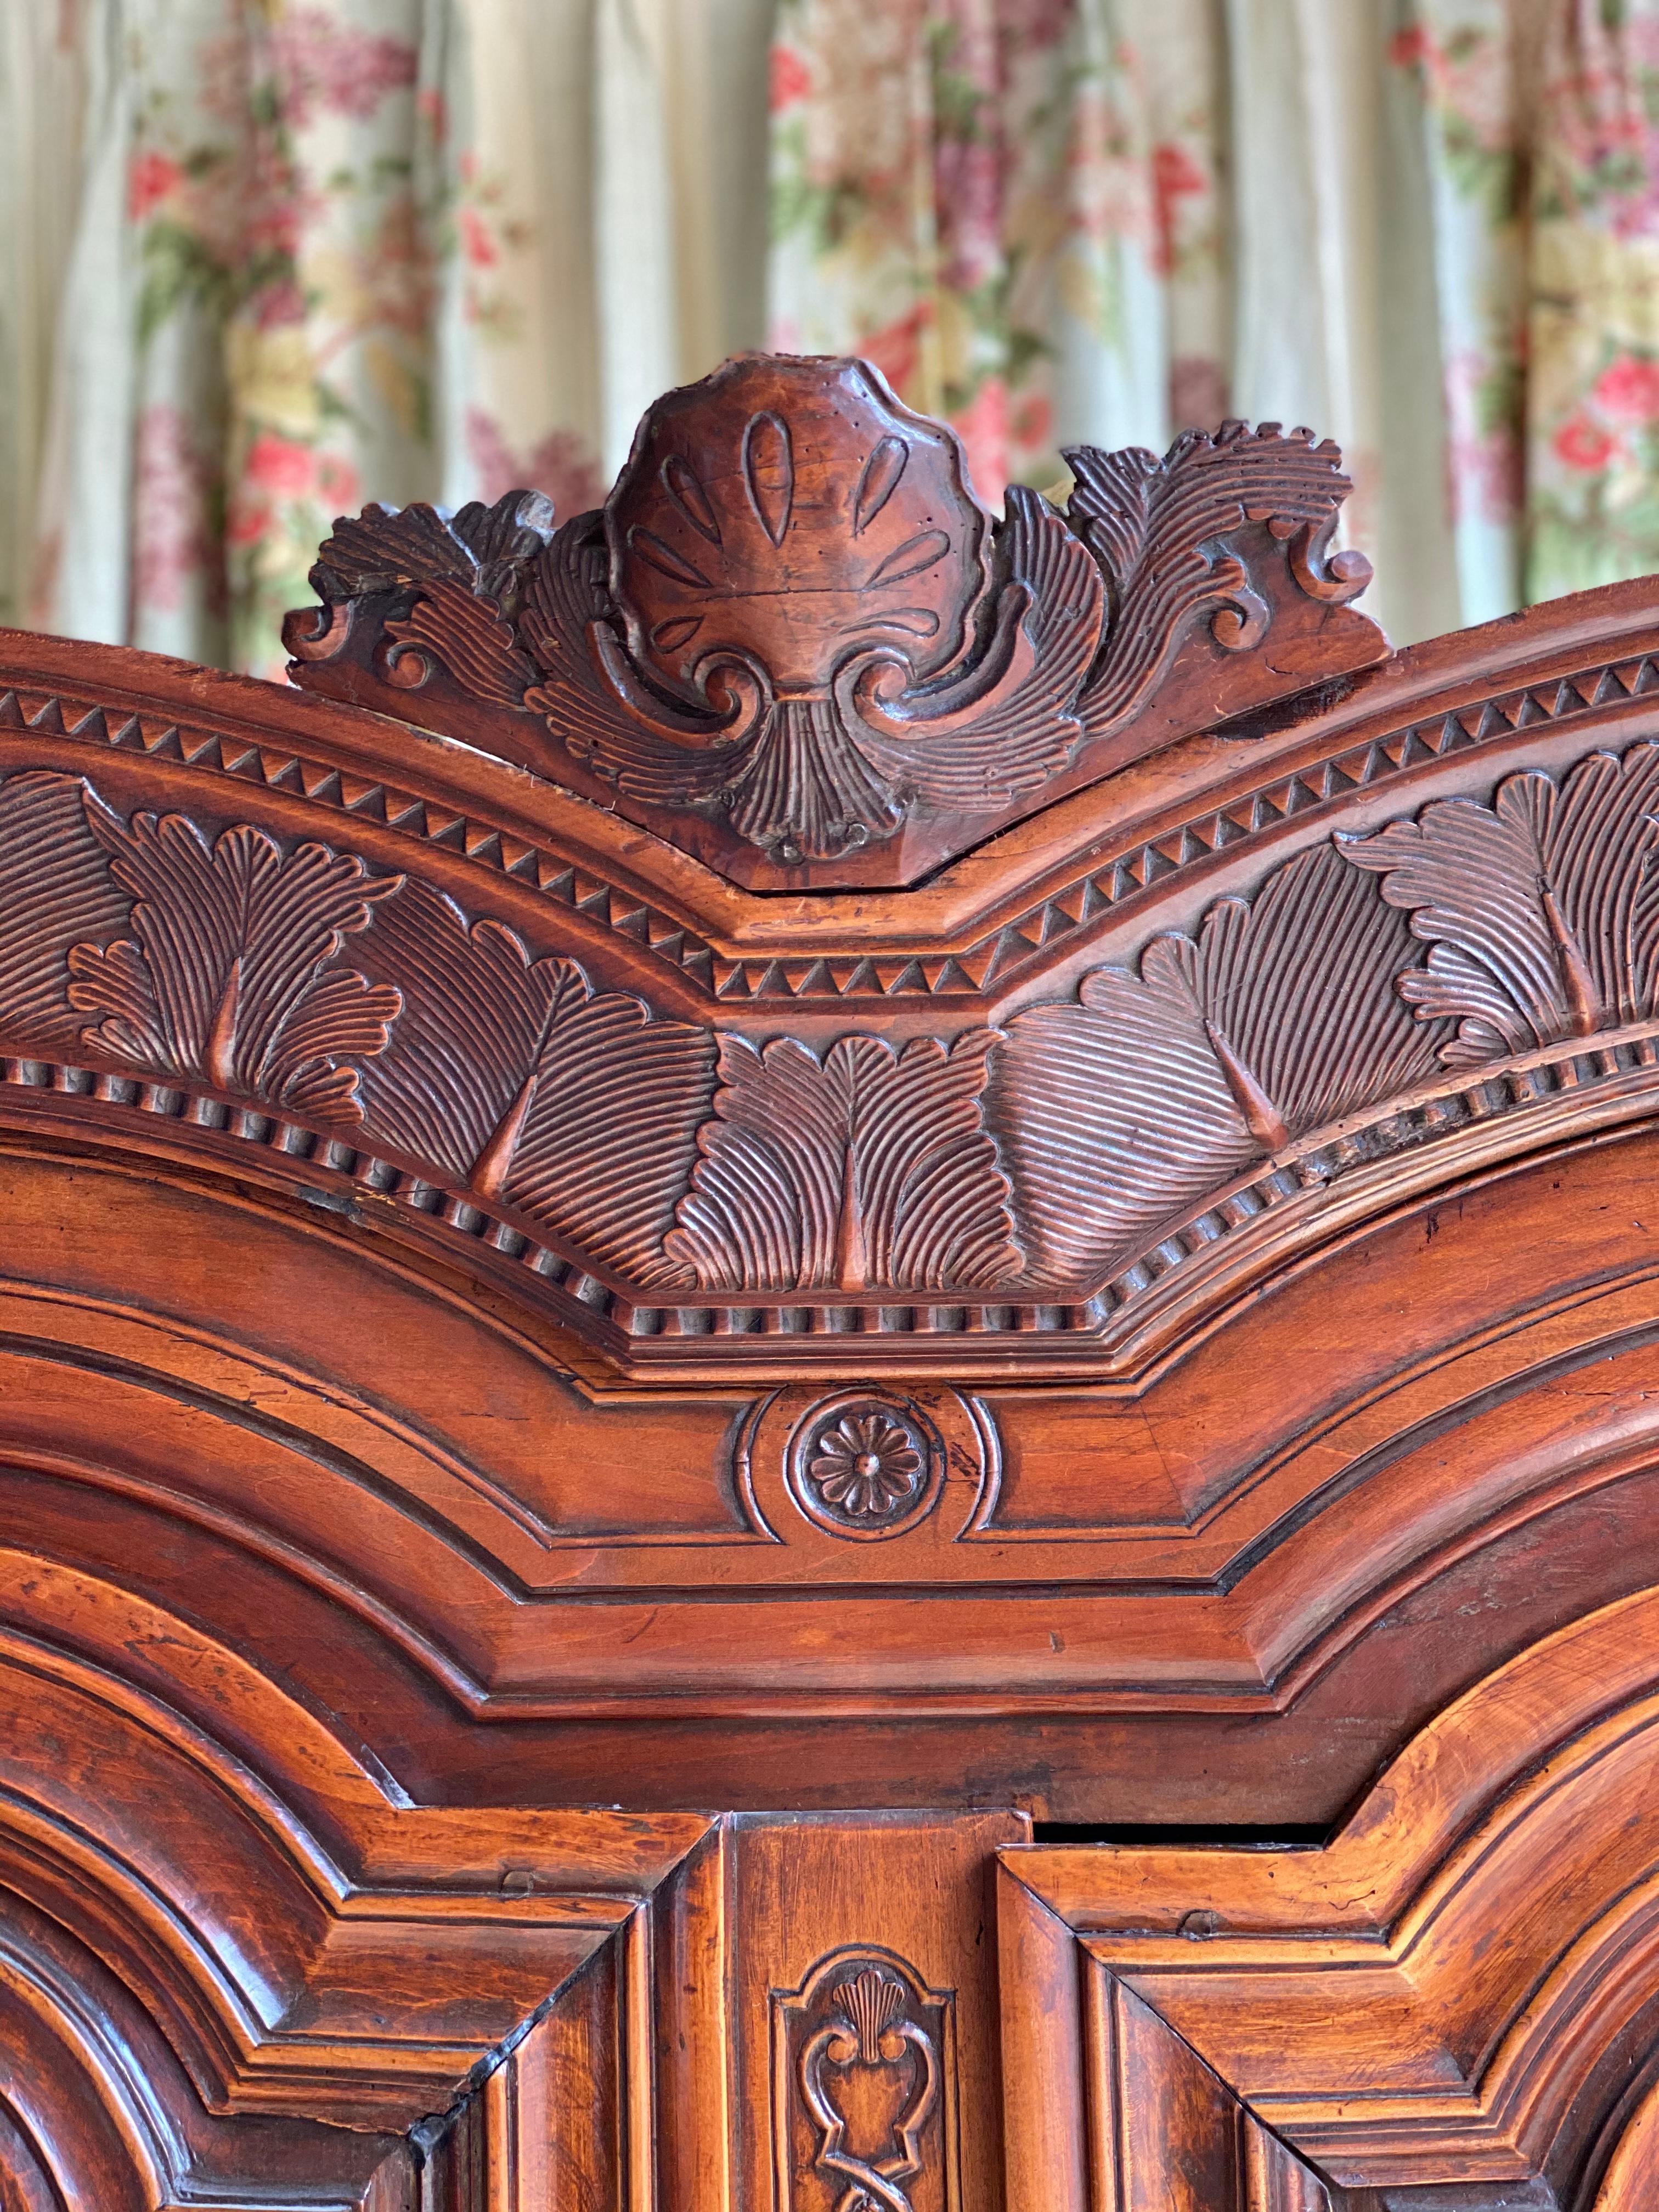 This Armoire, attributed to J.B. Depouez, features a large double bonnet
cornice above two tall doors, arched in the upper section. Adorned with
sawtooth accents above and below stylized oak leafe details on crown.
Deep set moldings are in the late